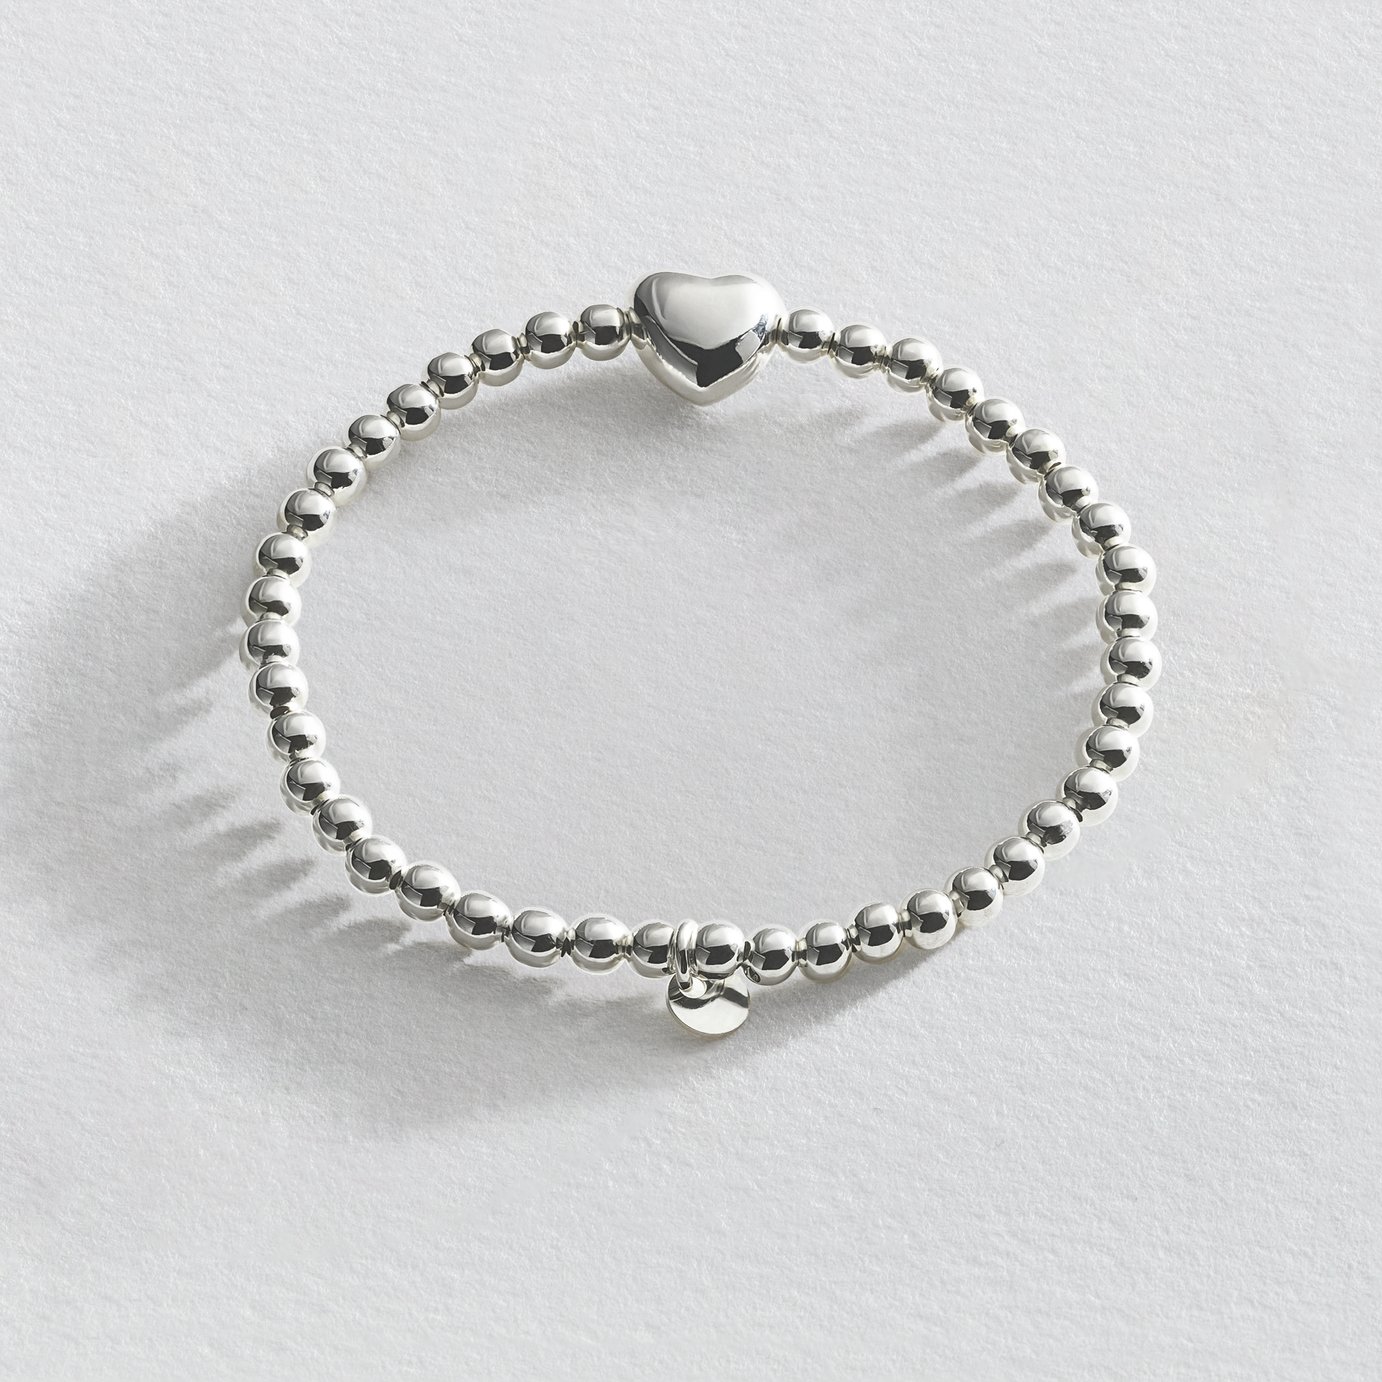 Revere Sterling Silver Beads Round Shape and Heart Bracelet